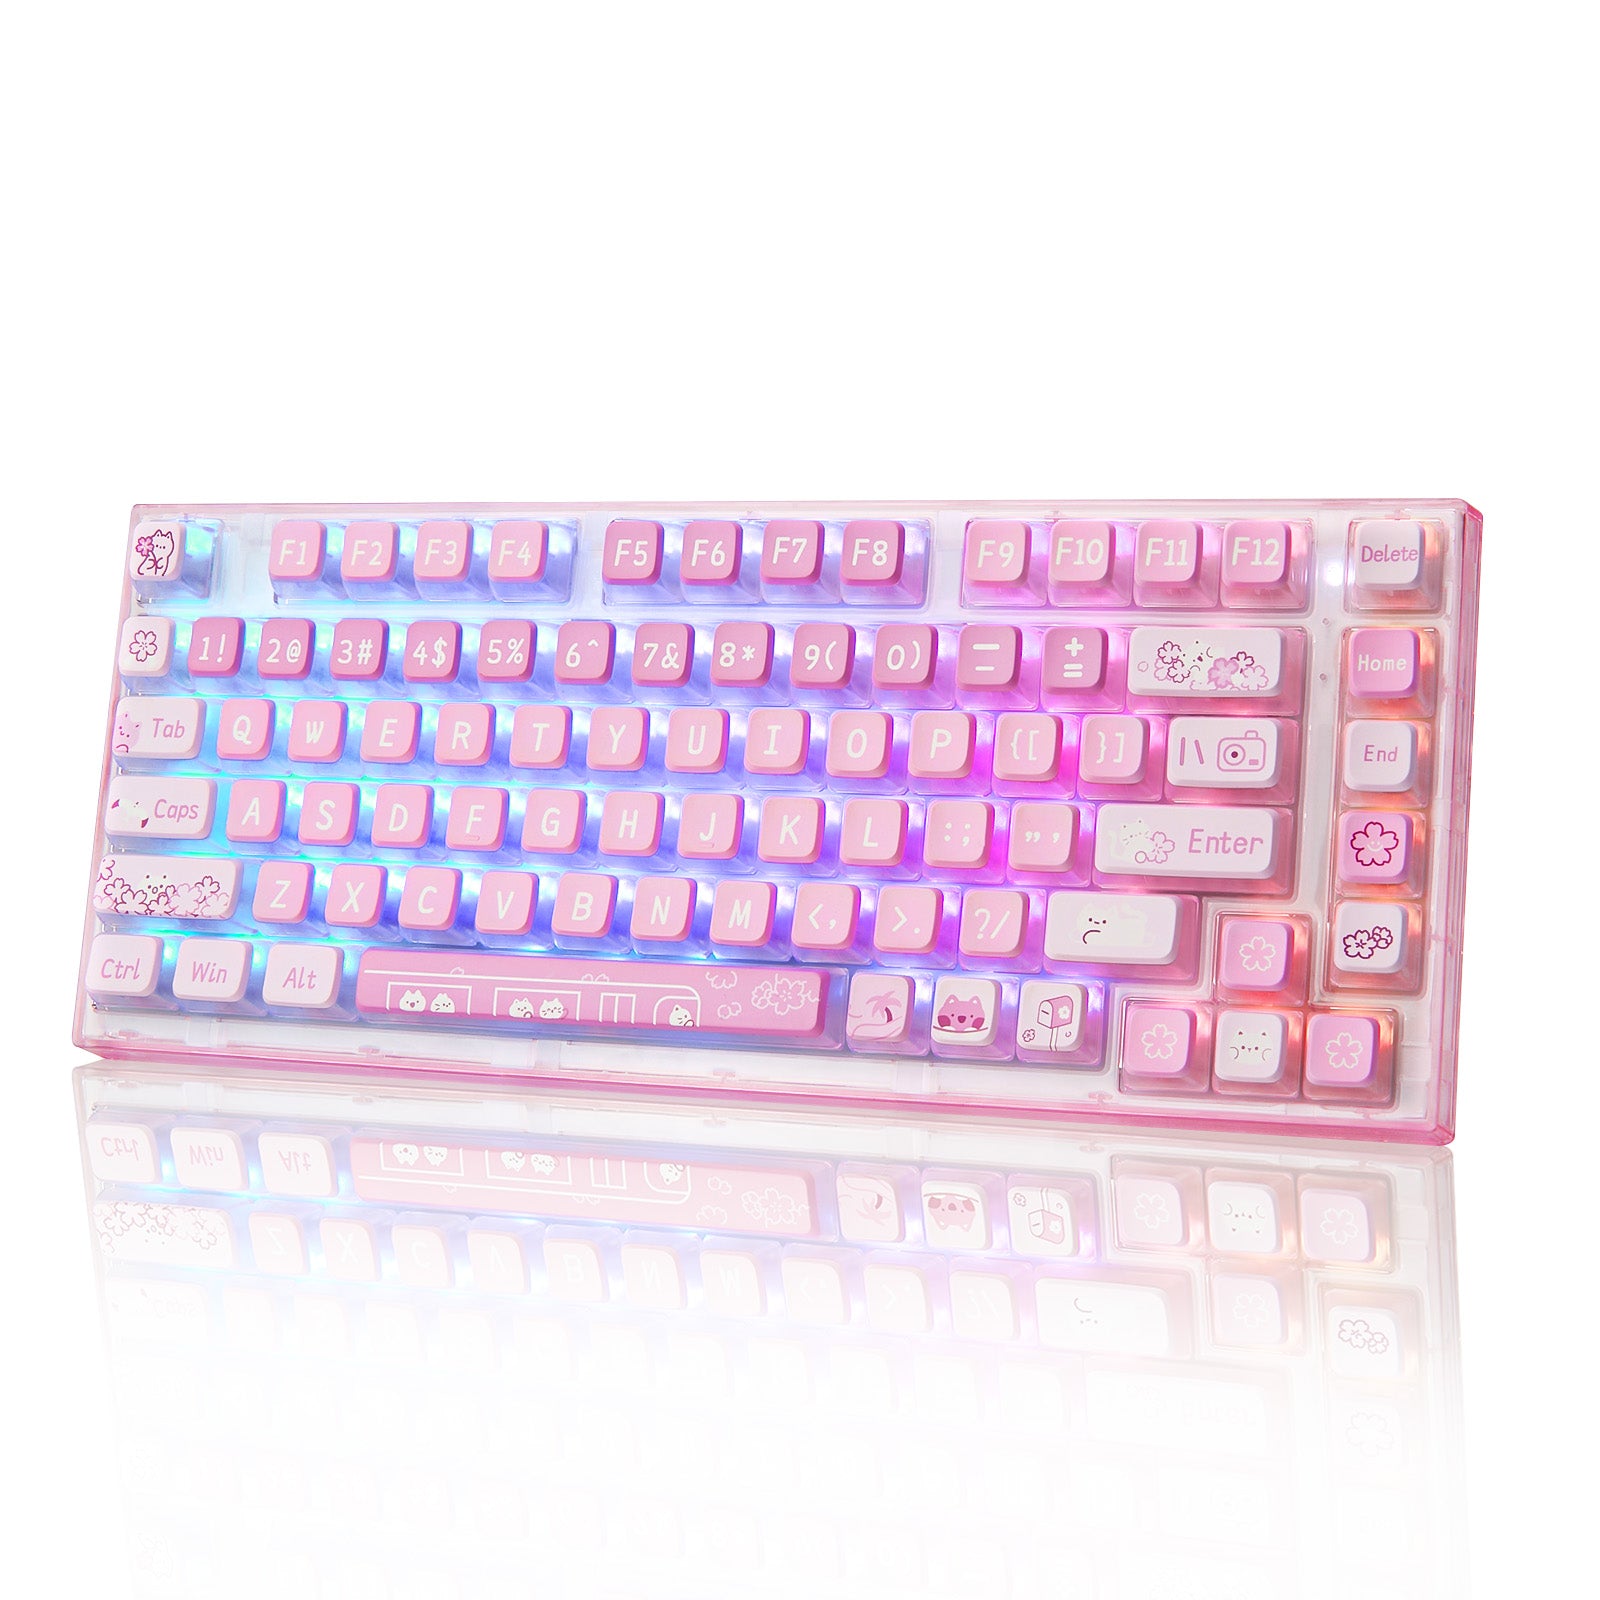 YUNZII X75/X75 PRO Pink 82 Keys Hot Swappable Gasket Transparent